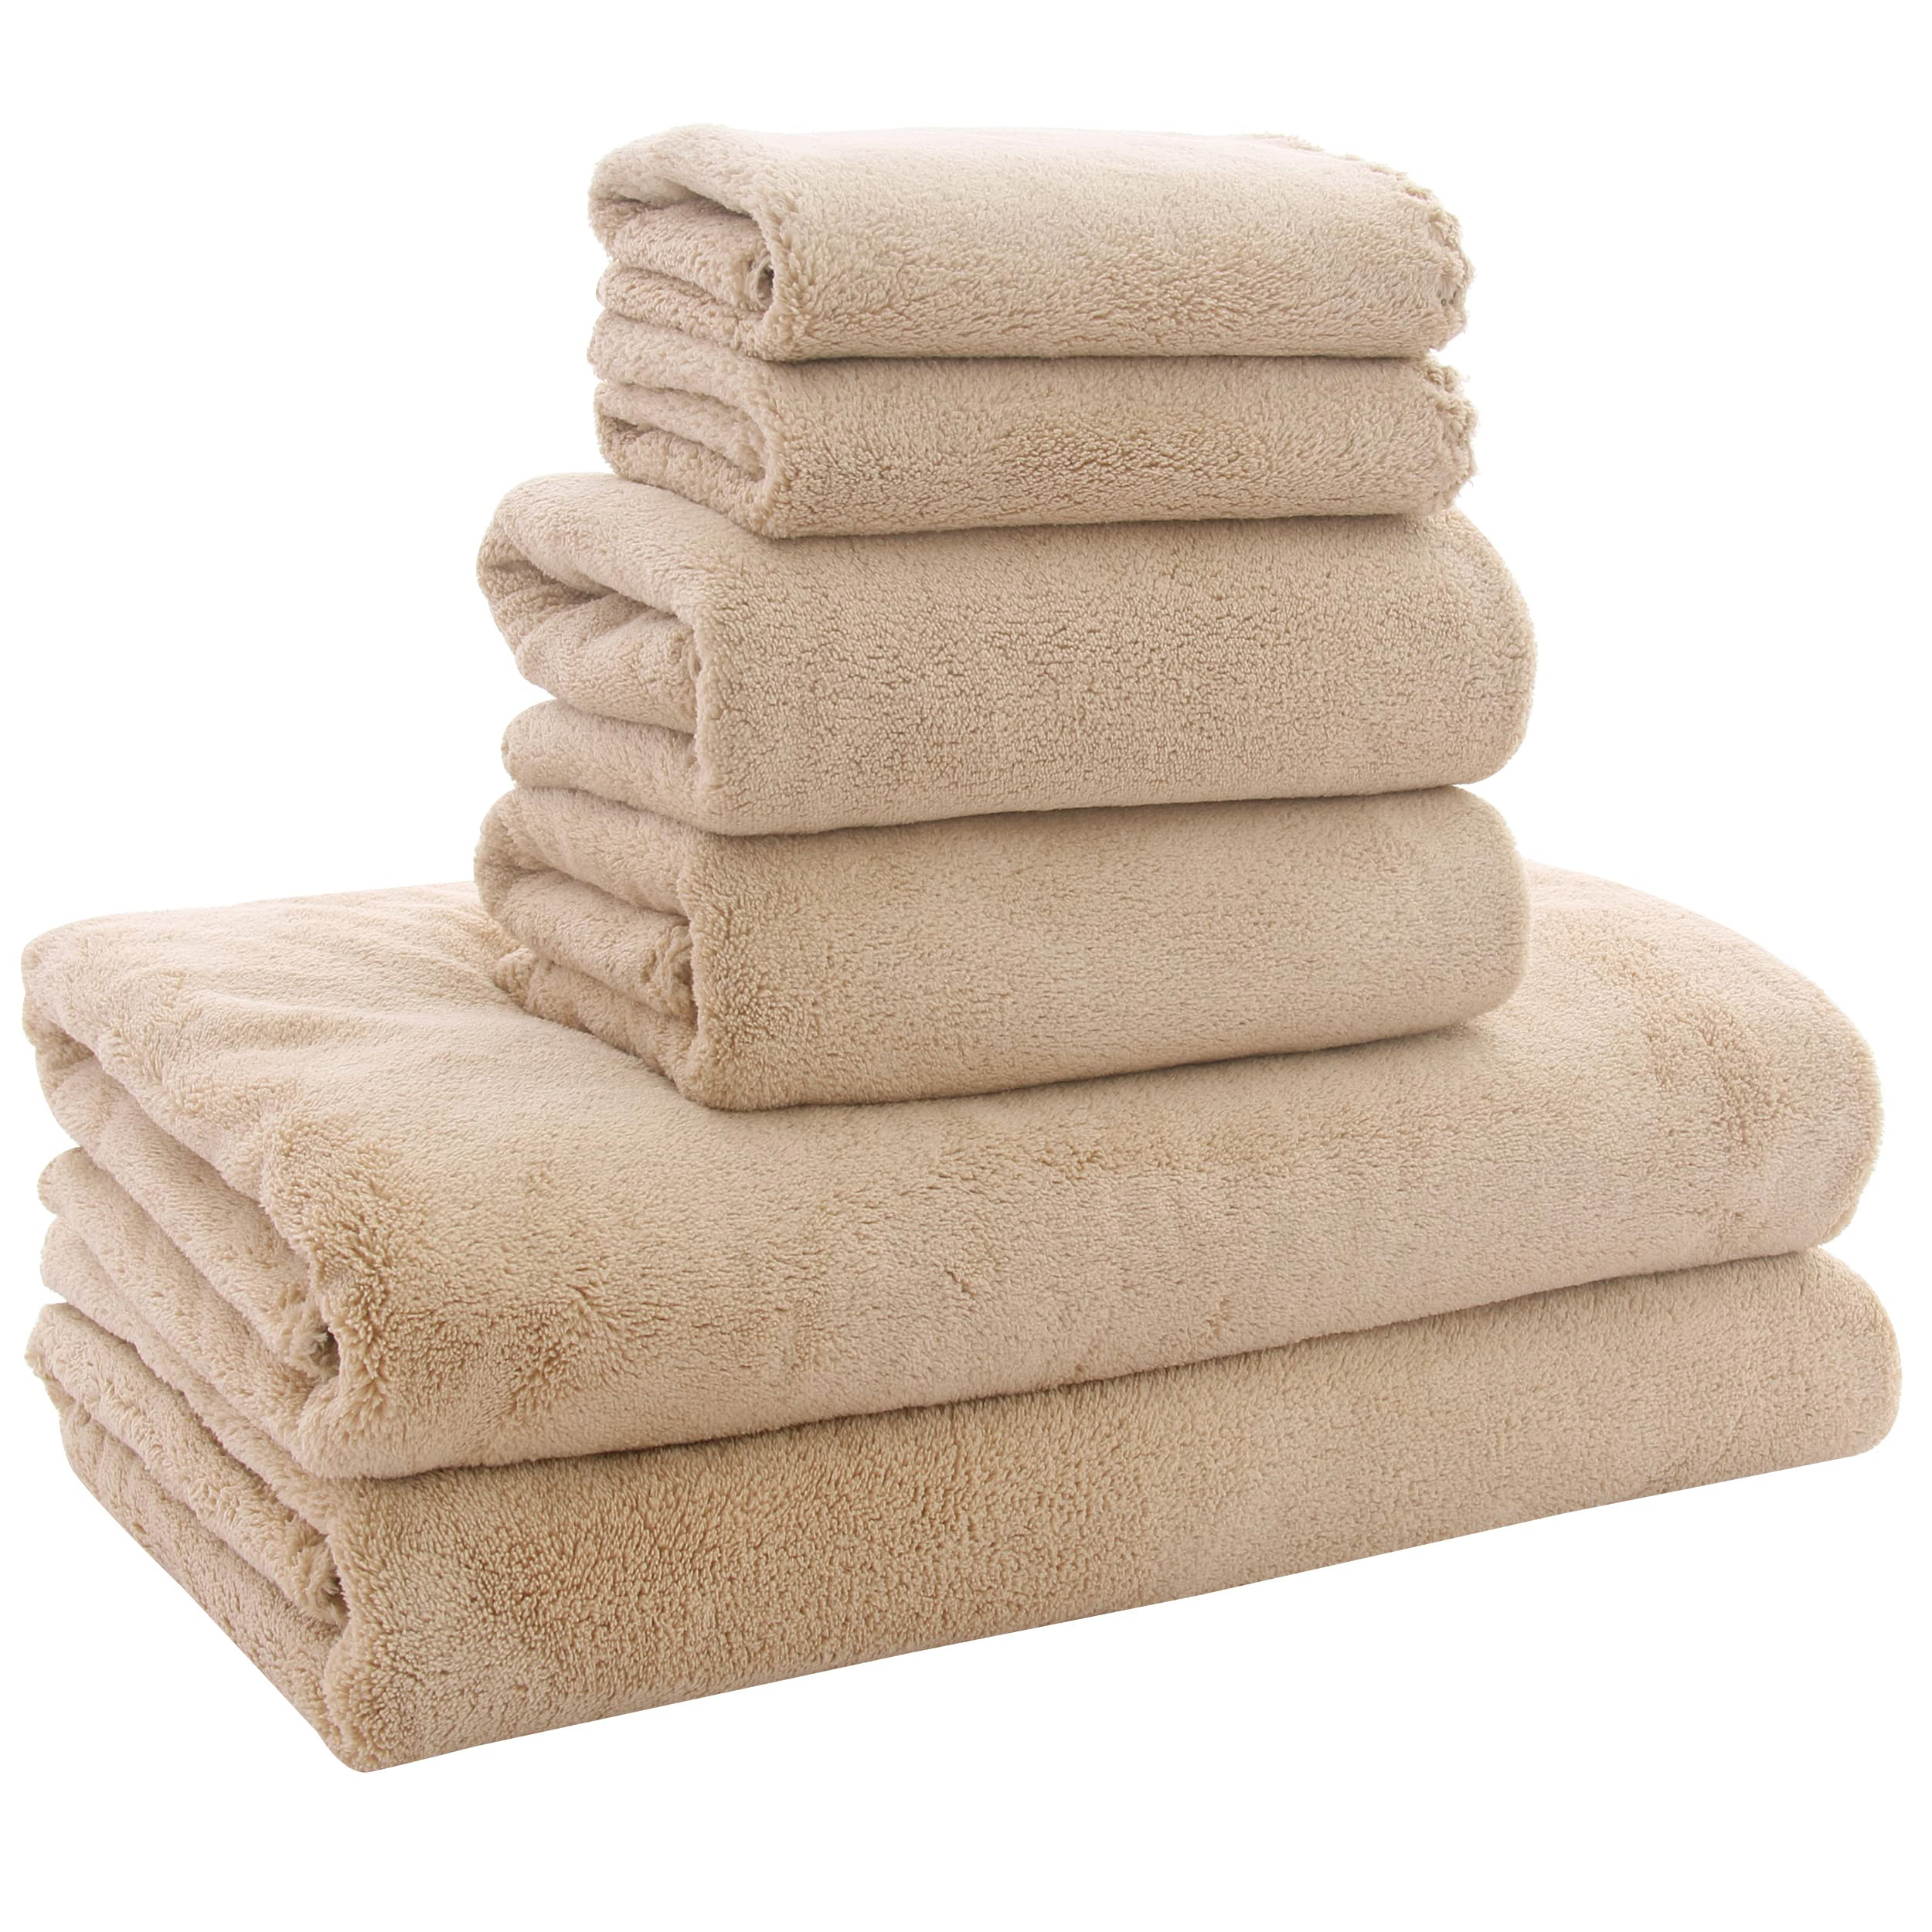 Fluffy Thick Coral Fleece Towels, Highly Absorbent And Super Soft